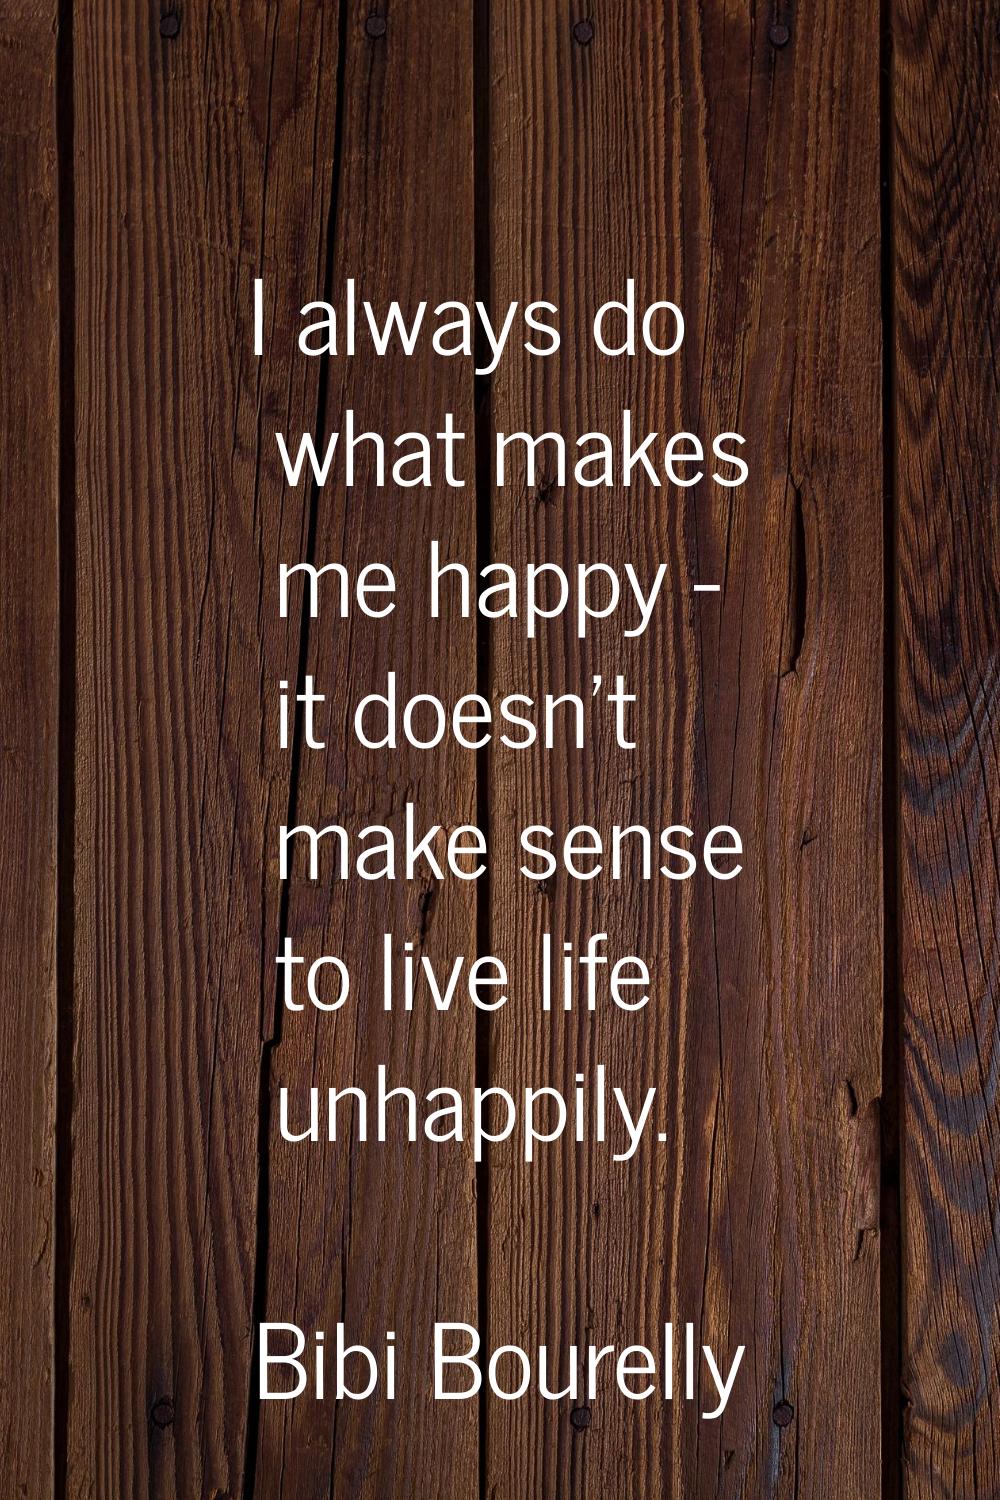 I always do what makes me happy - it doesn't make sense to live life unhappily.